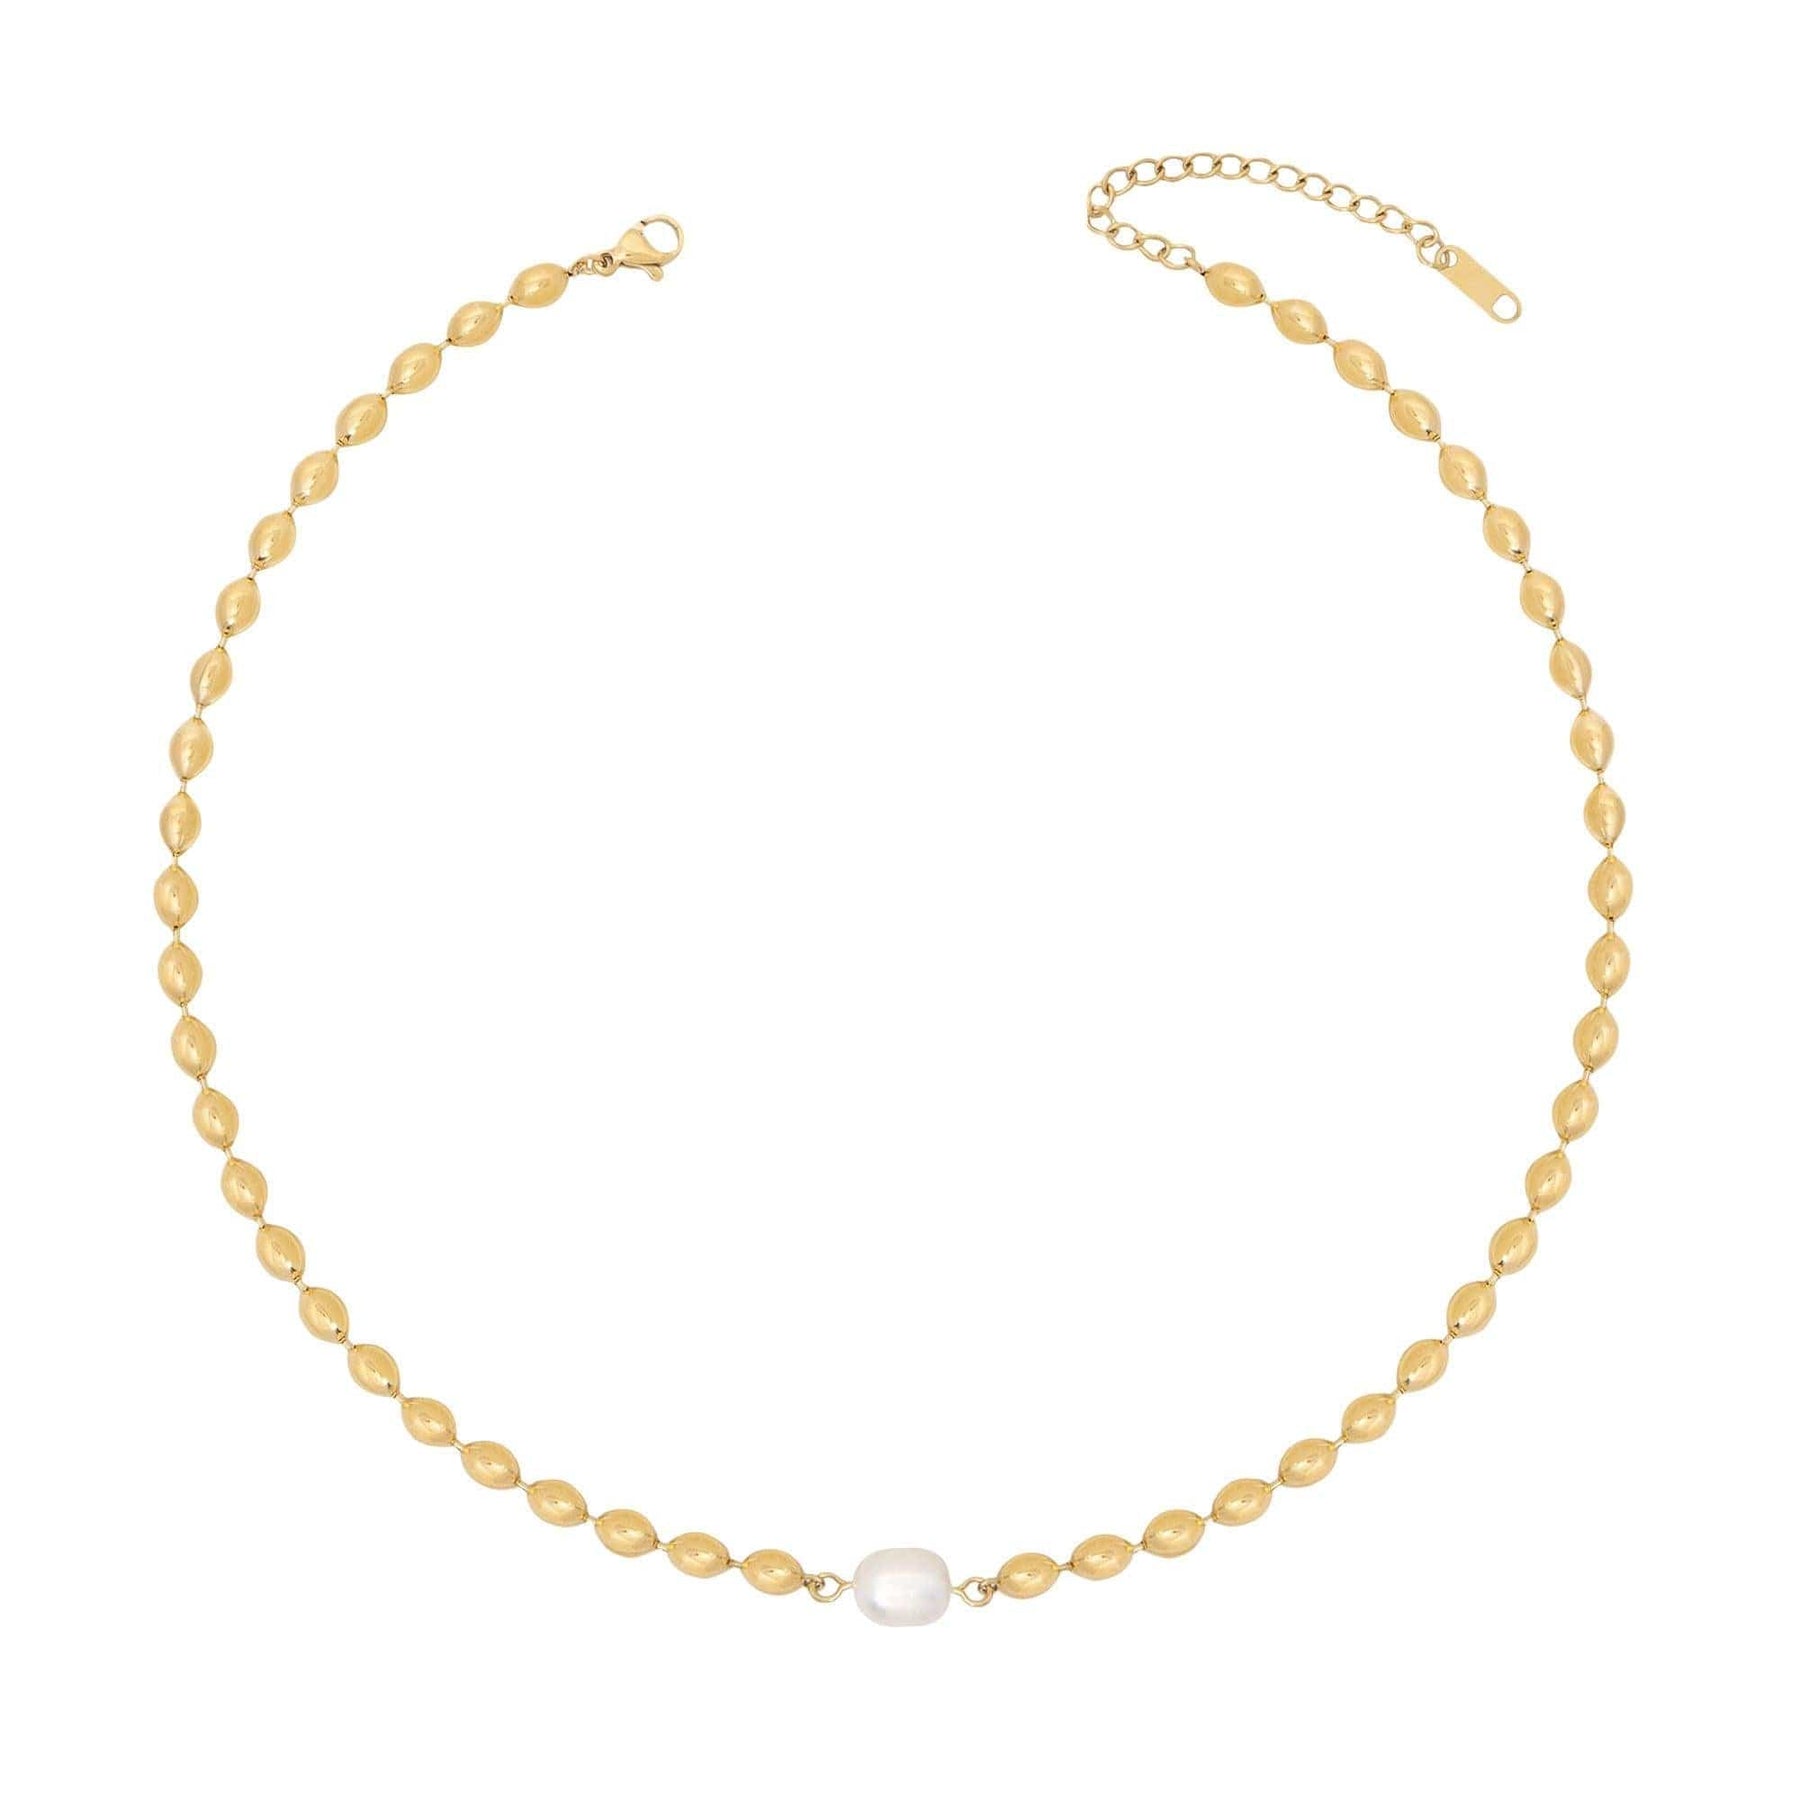 BohoMoon Stainless Steel Olivia Pearl Necklace Gold